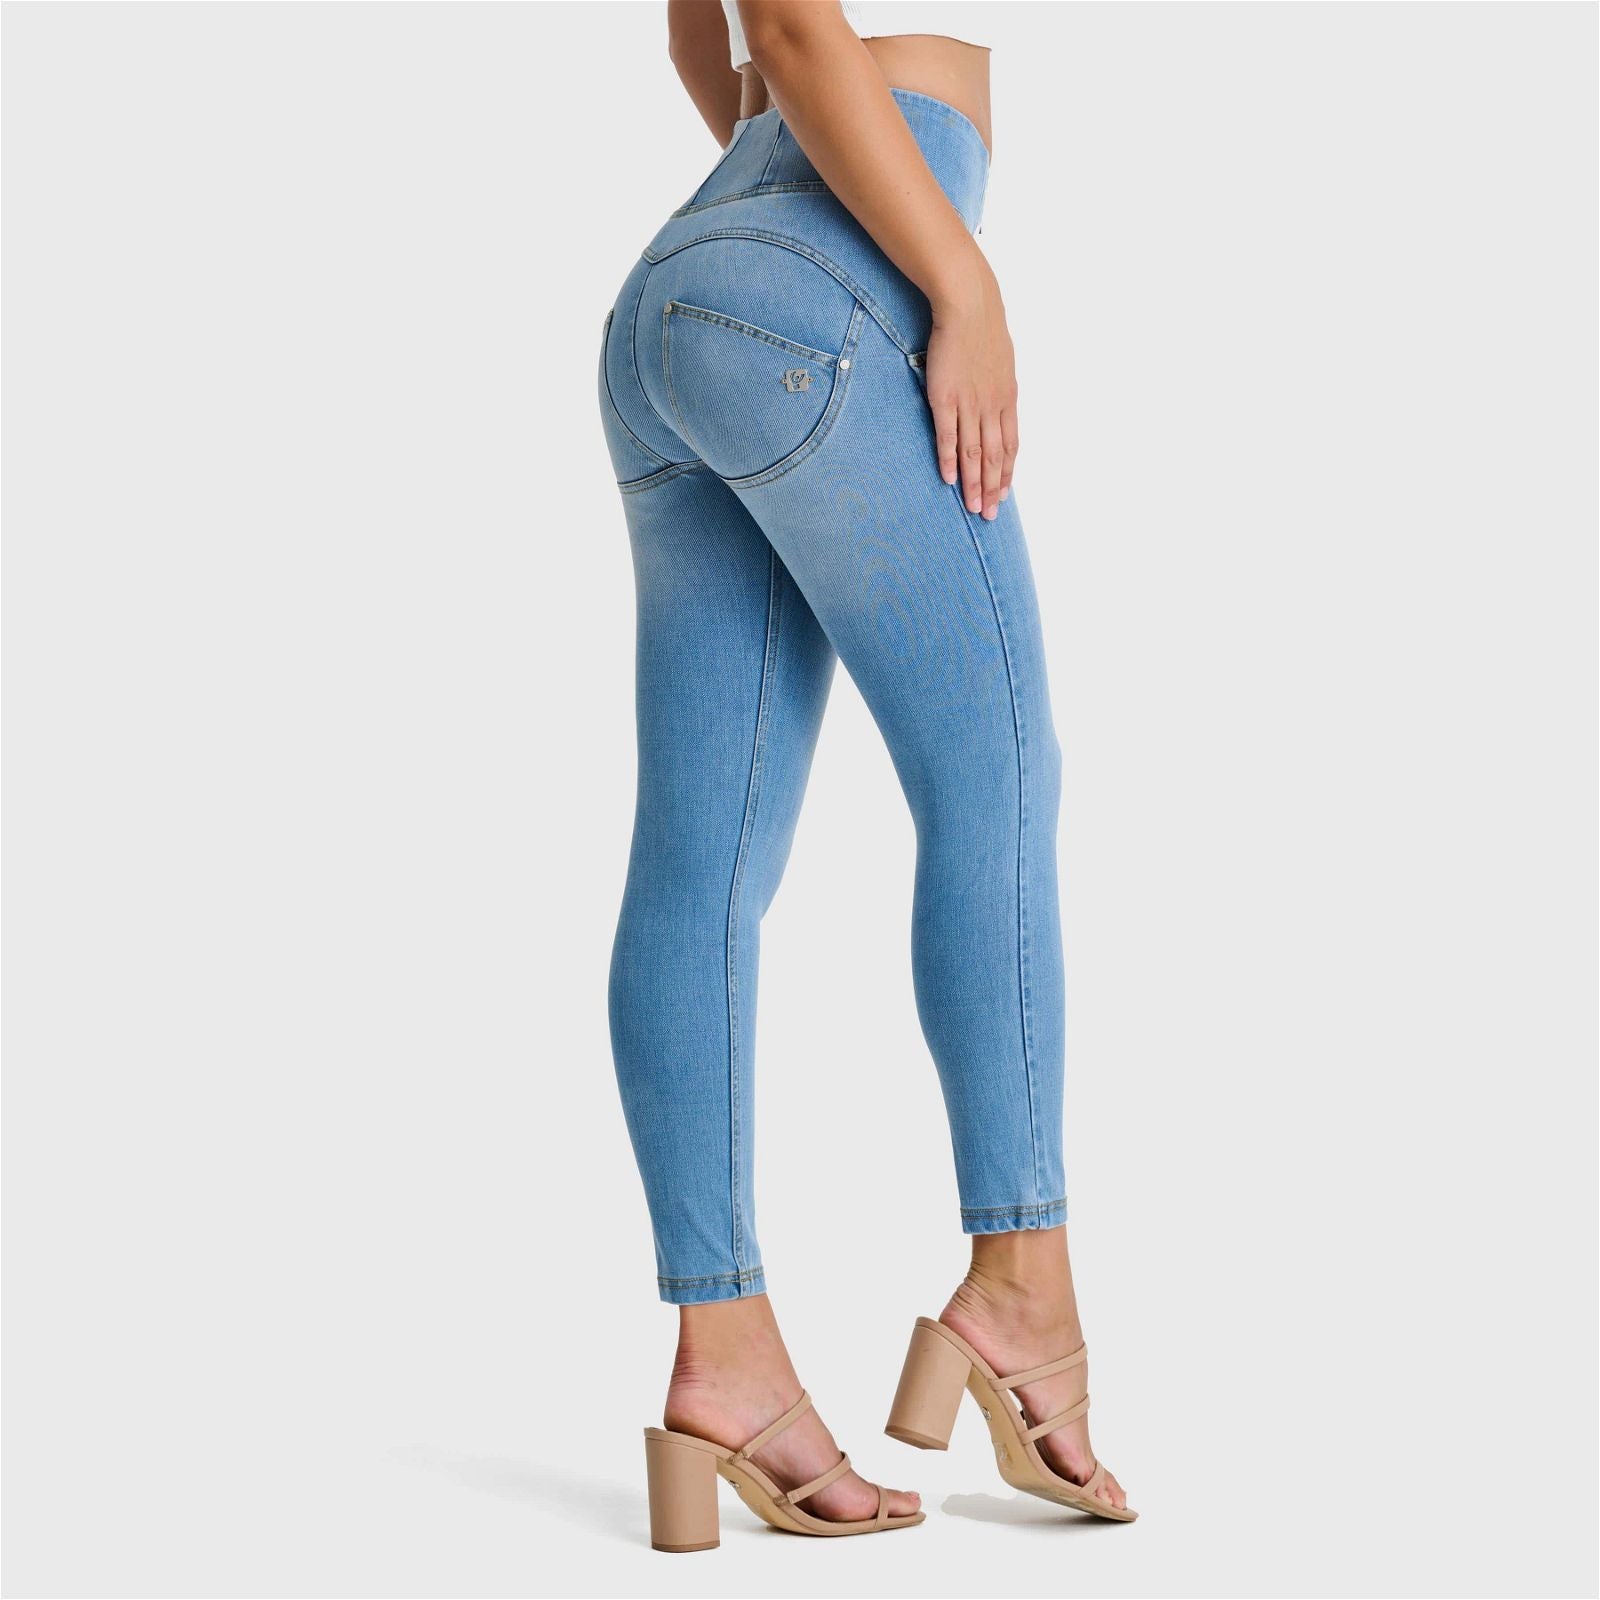 WR.UP® SNUG Jeans - High Waisted - 7/8 Length - Light Blue + Yellow Stitching 2